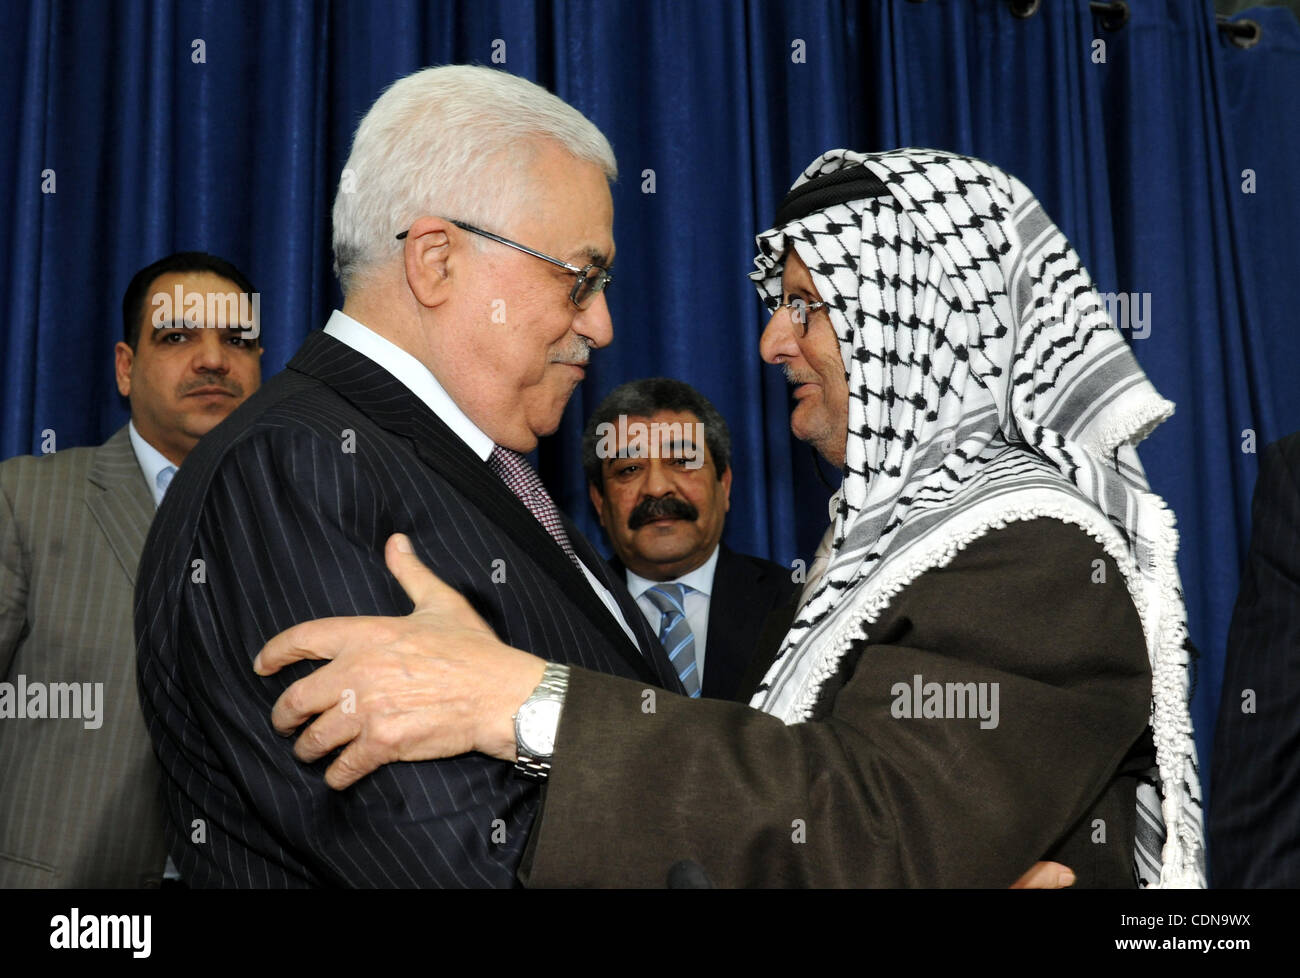 Palestinian President Mahmoud Abbas (Abu Mazen) meets with the participants of the fourth Palestinian Educational Cultural Forum in the West Bank city of Ramallah on May 14, 2011. Photo by Thaer Ganaim Stock Photo